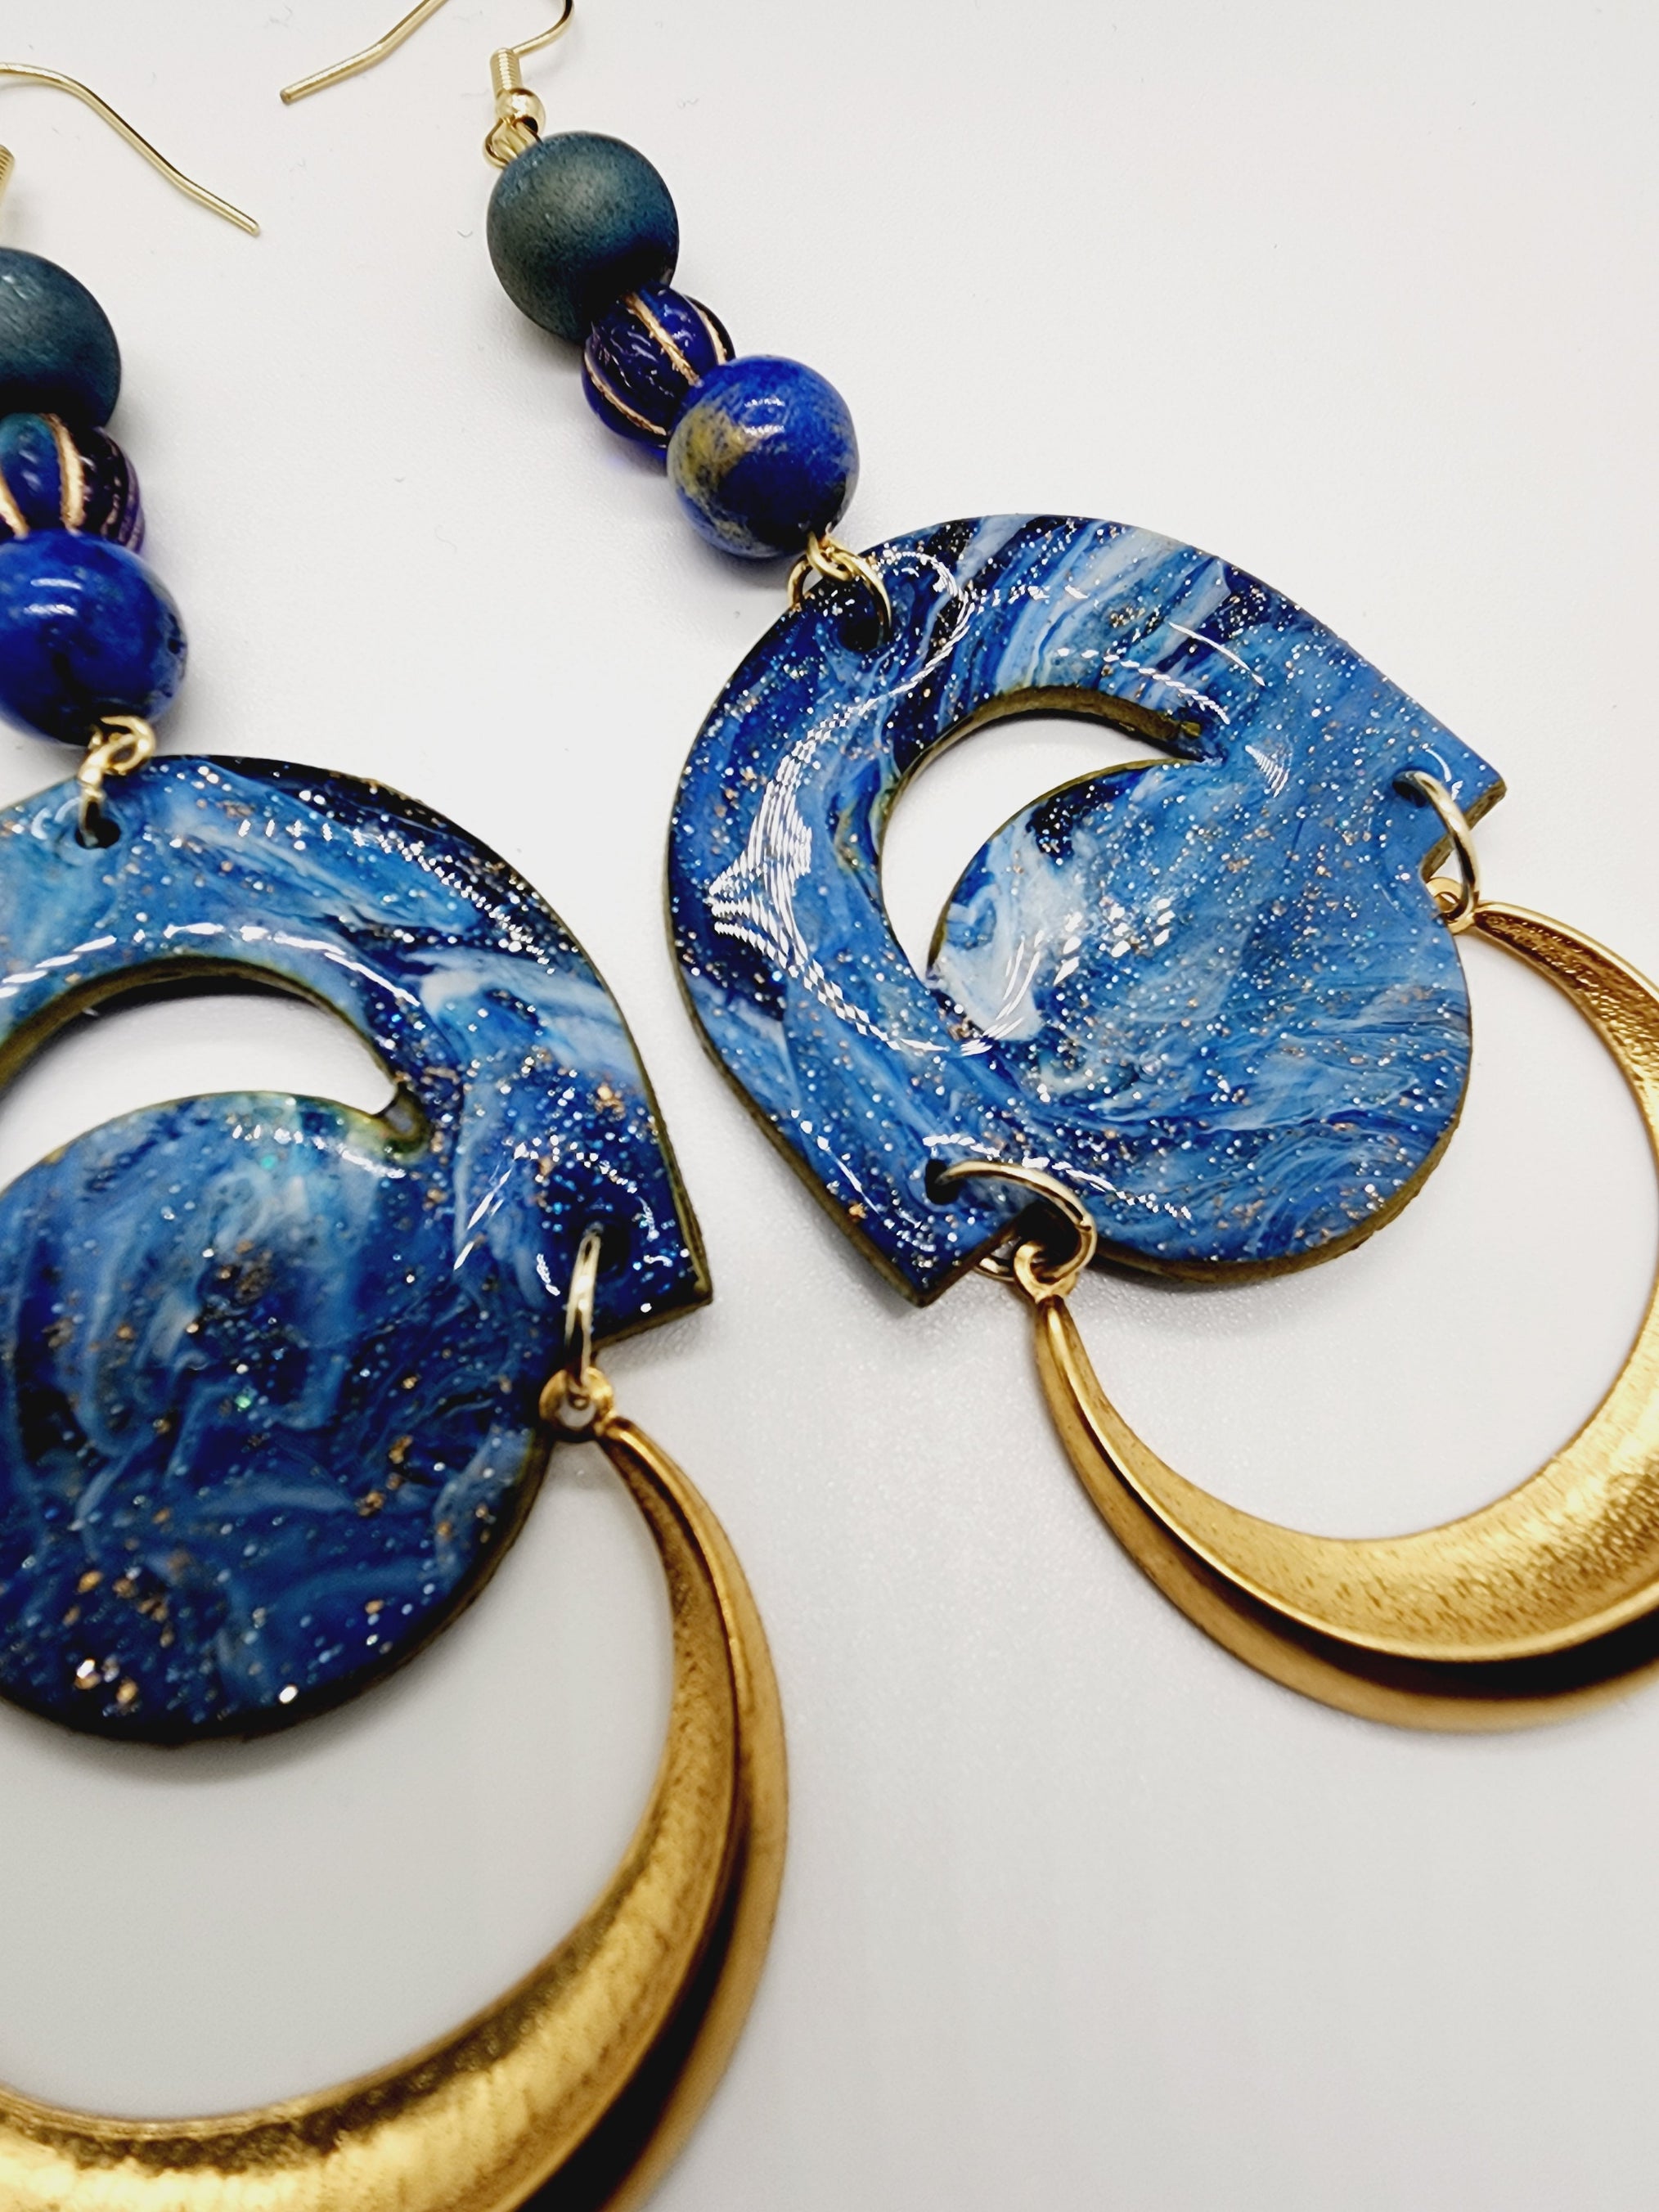 Length: 4.5 inches | Weight: 0.8 ounces   Distinctly You! These handmade earrings are made using blue and gold swirl polymer clay, brass charm, blue speckled beads, and hypoallergenic hooks with back closures. 